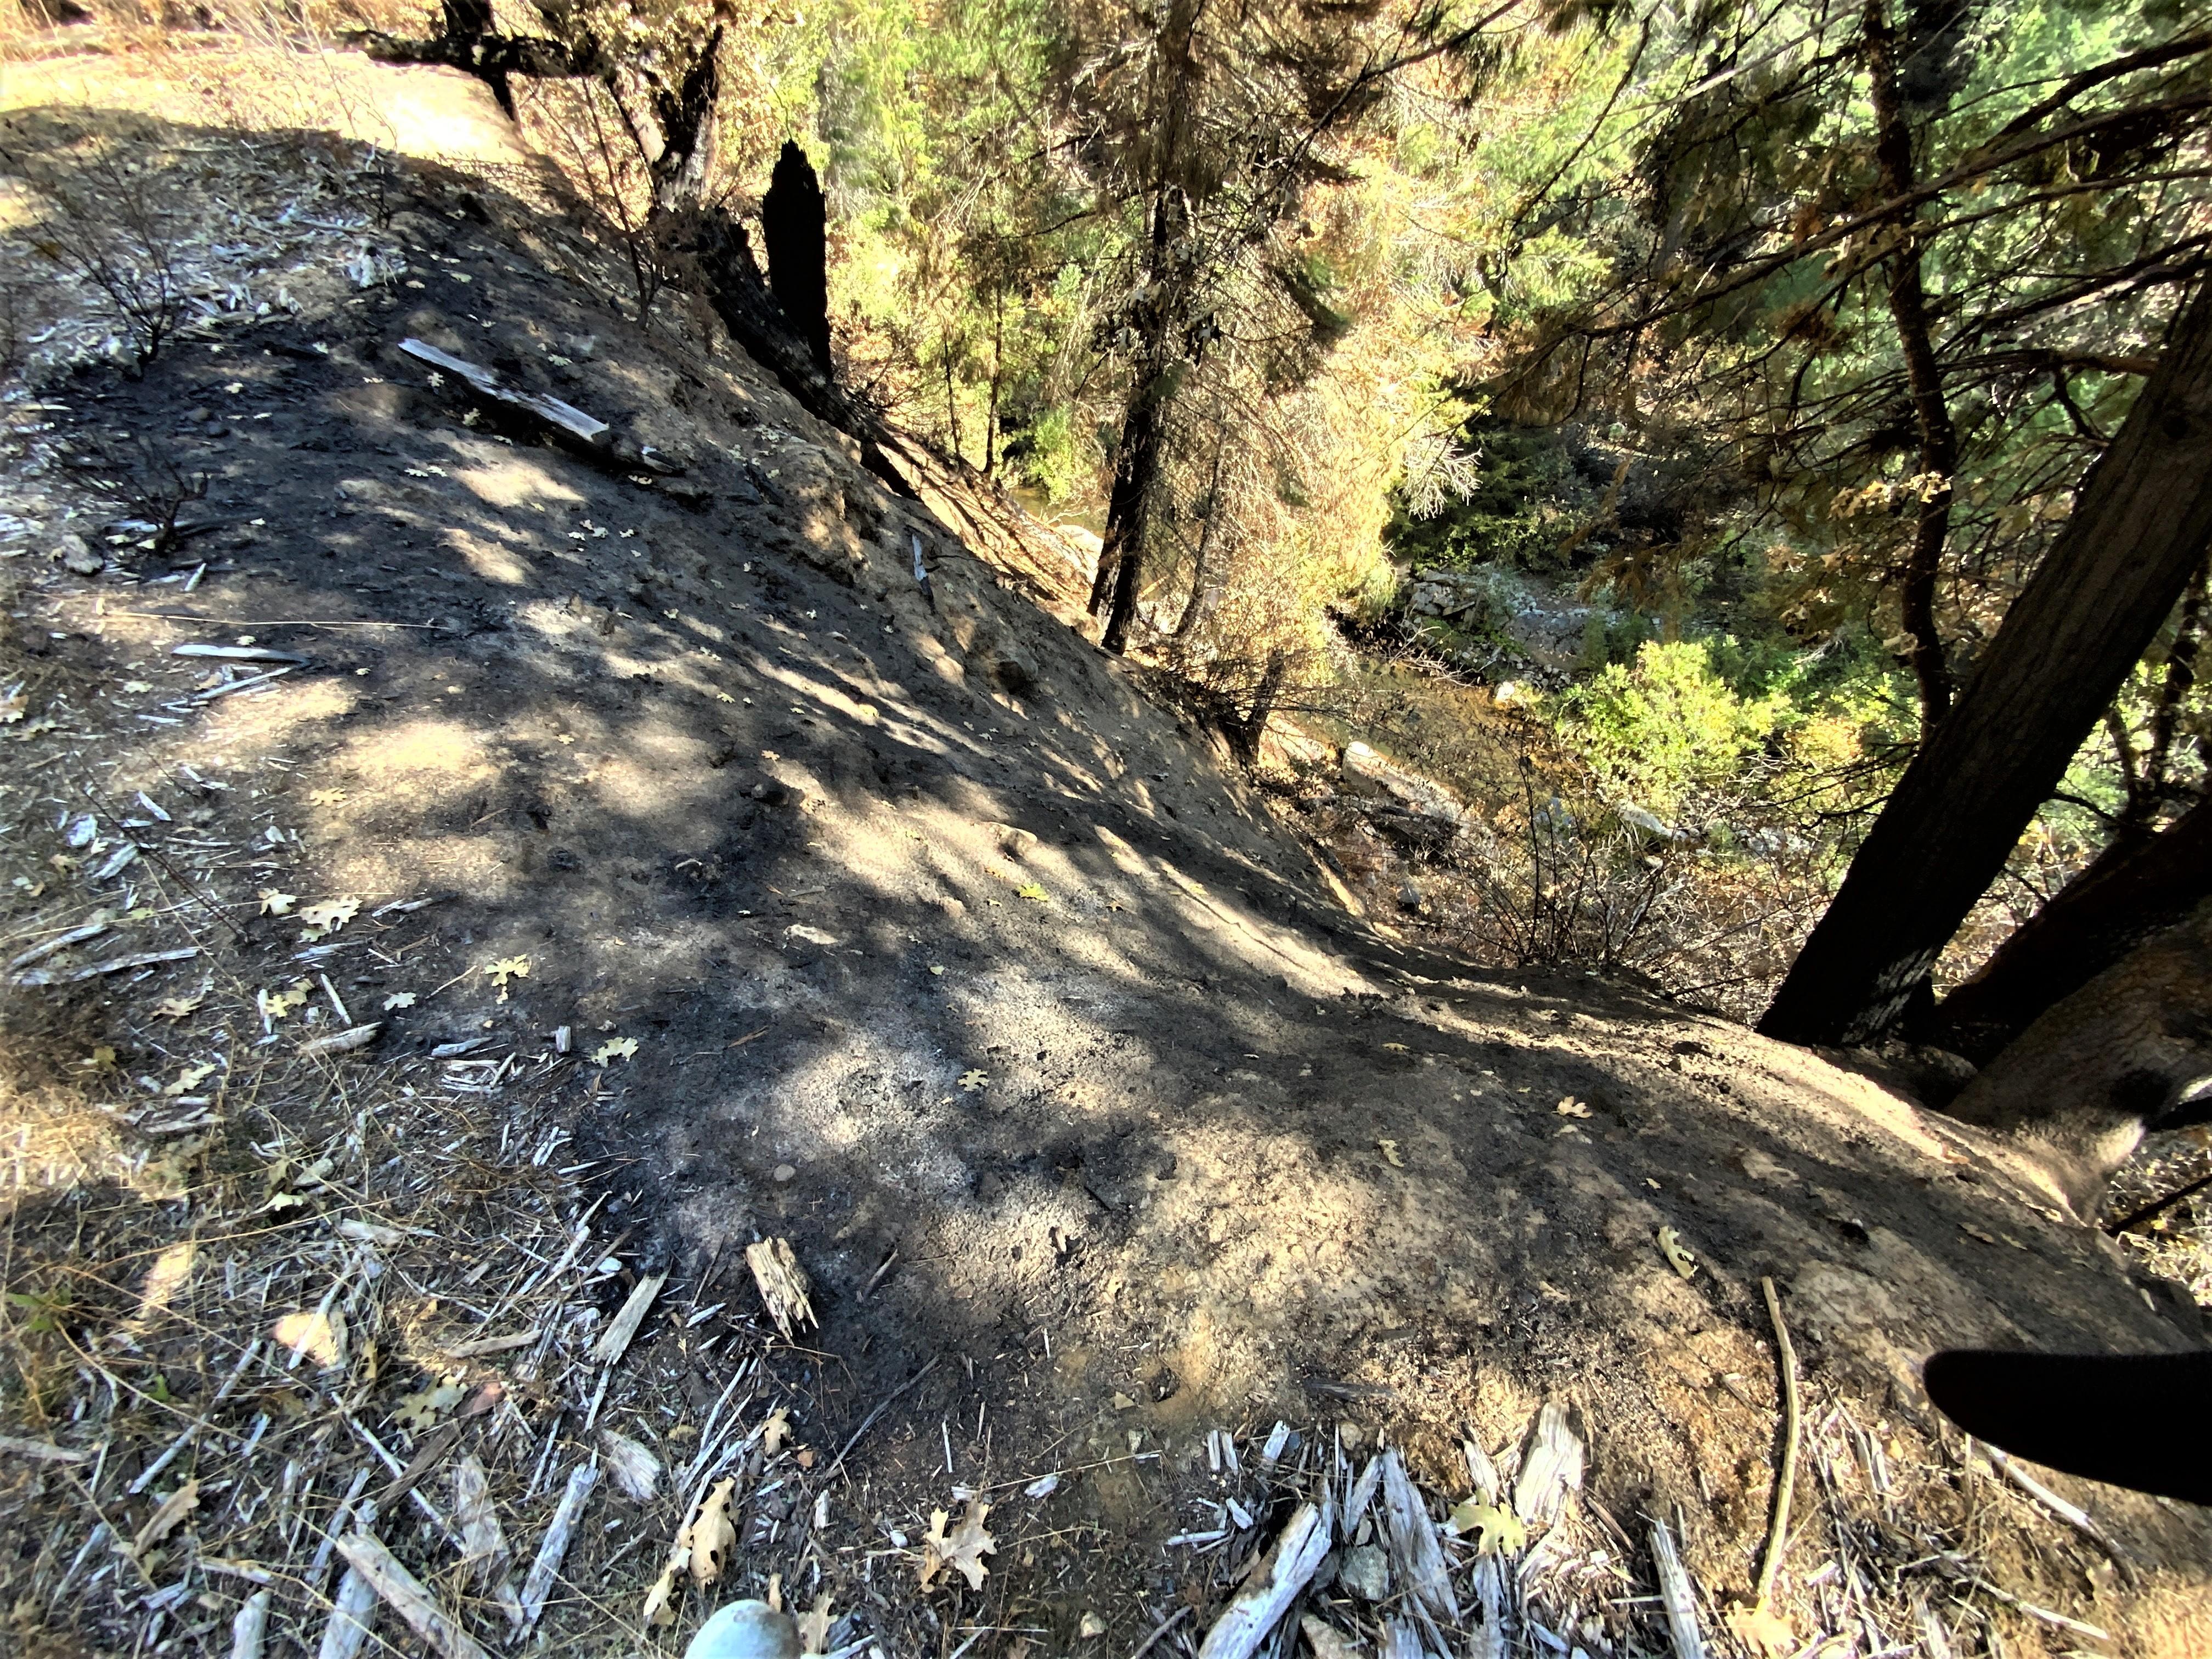 Image showing The Beginning of an edge failure on FS road 13N48 above Pilot Creek in Mosquito burned area